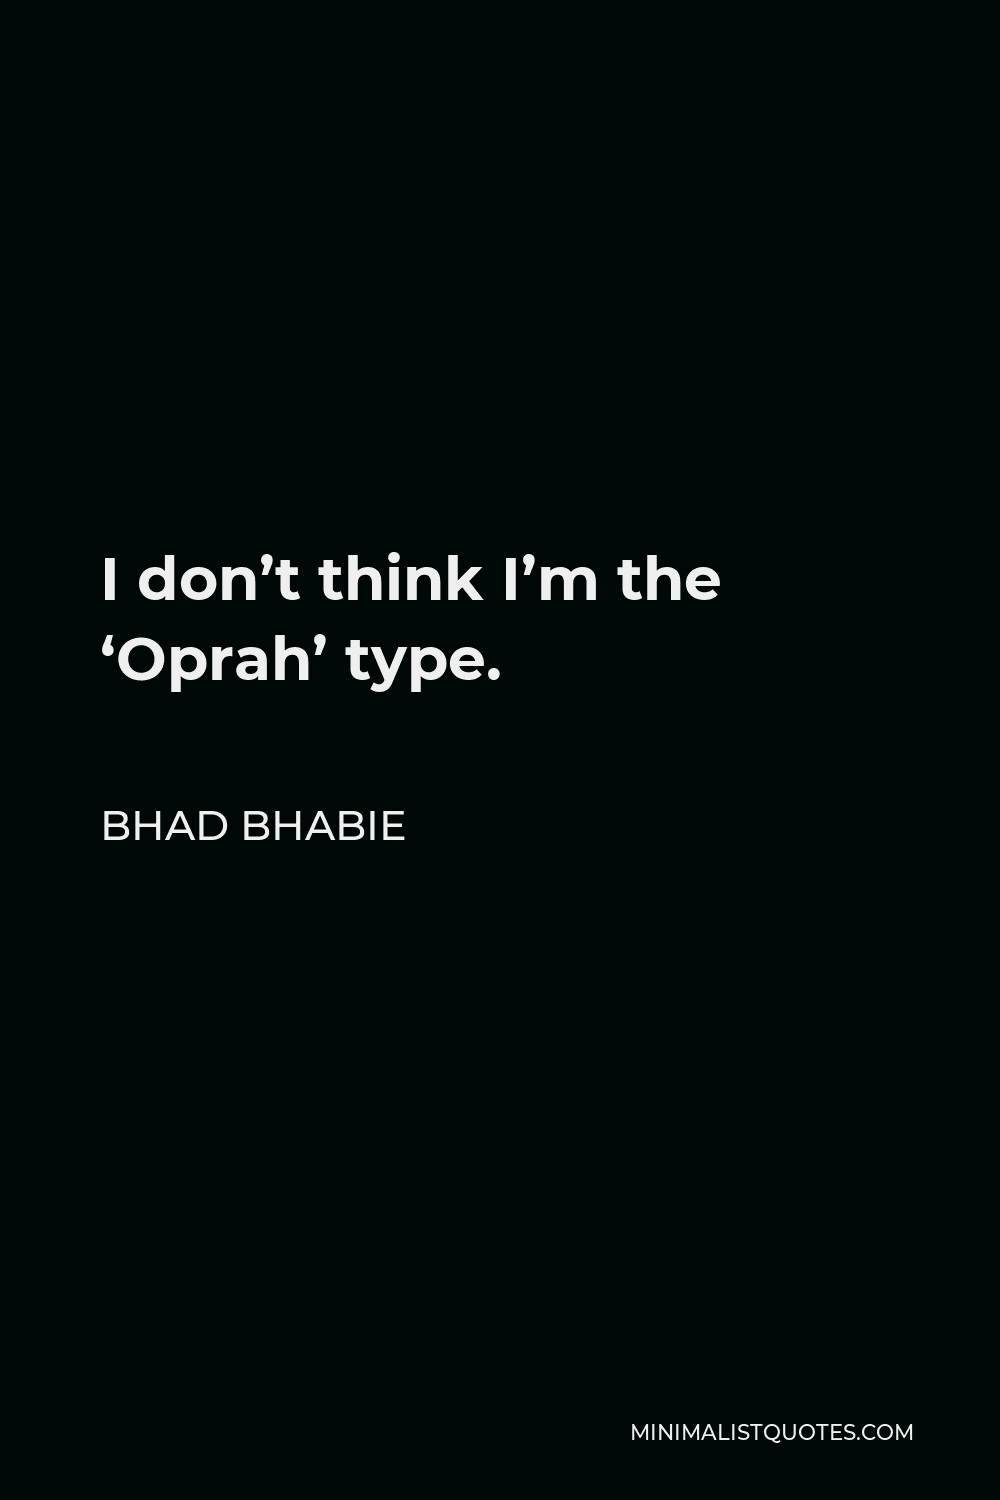 Bhad Bhabie Quote - I don’t think I’m the ‘Oprah’ type.